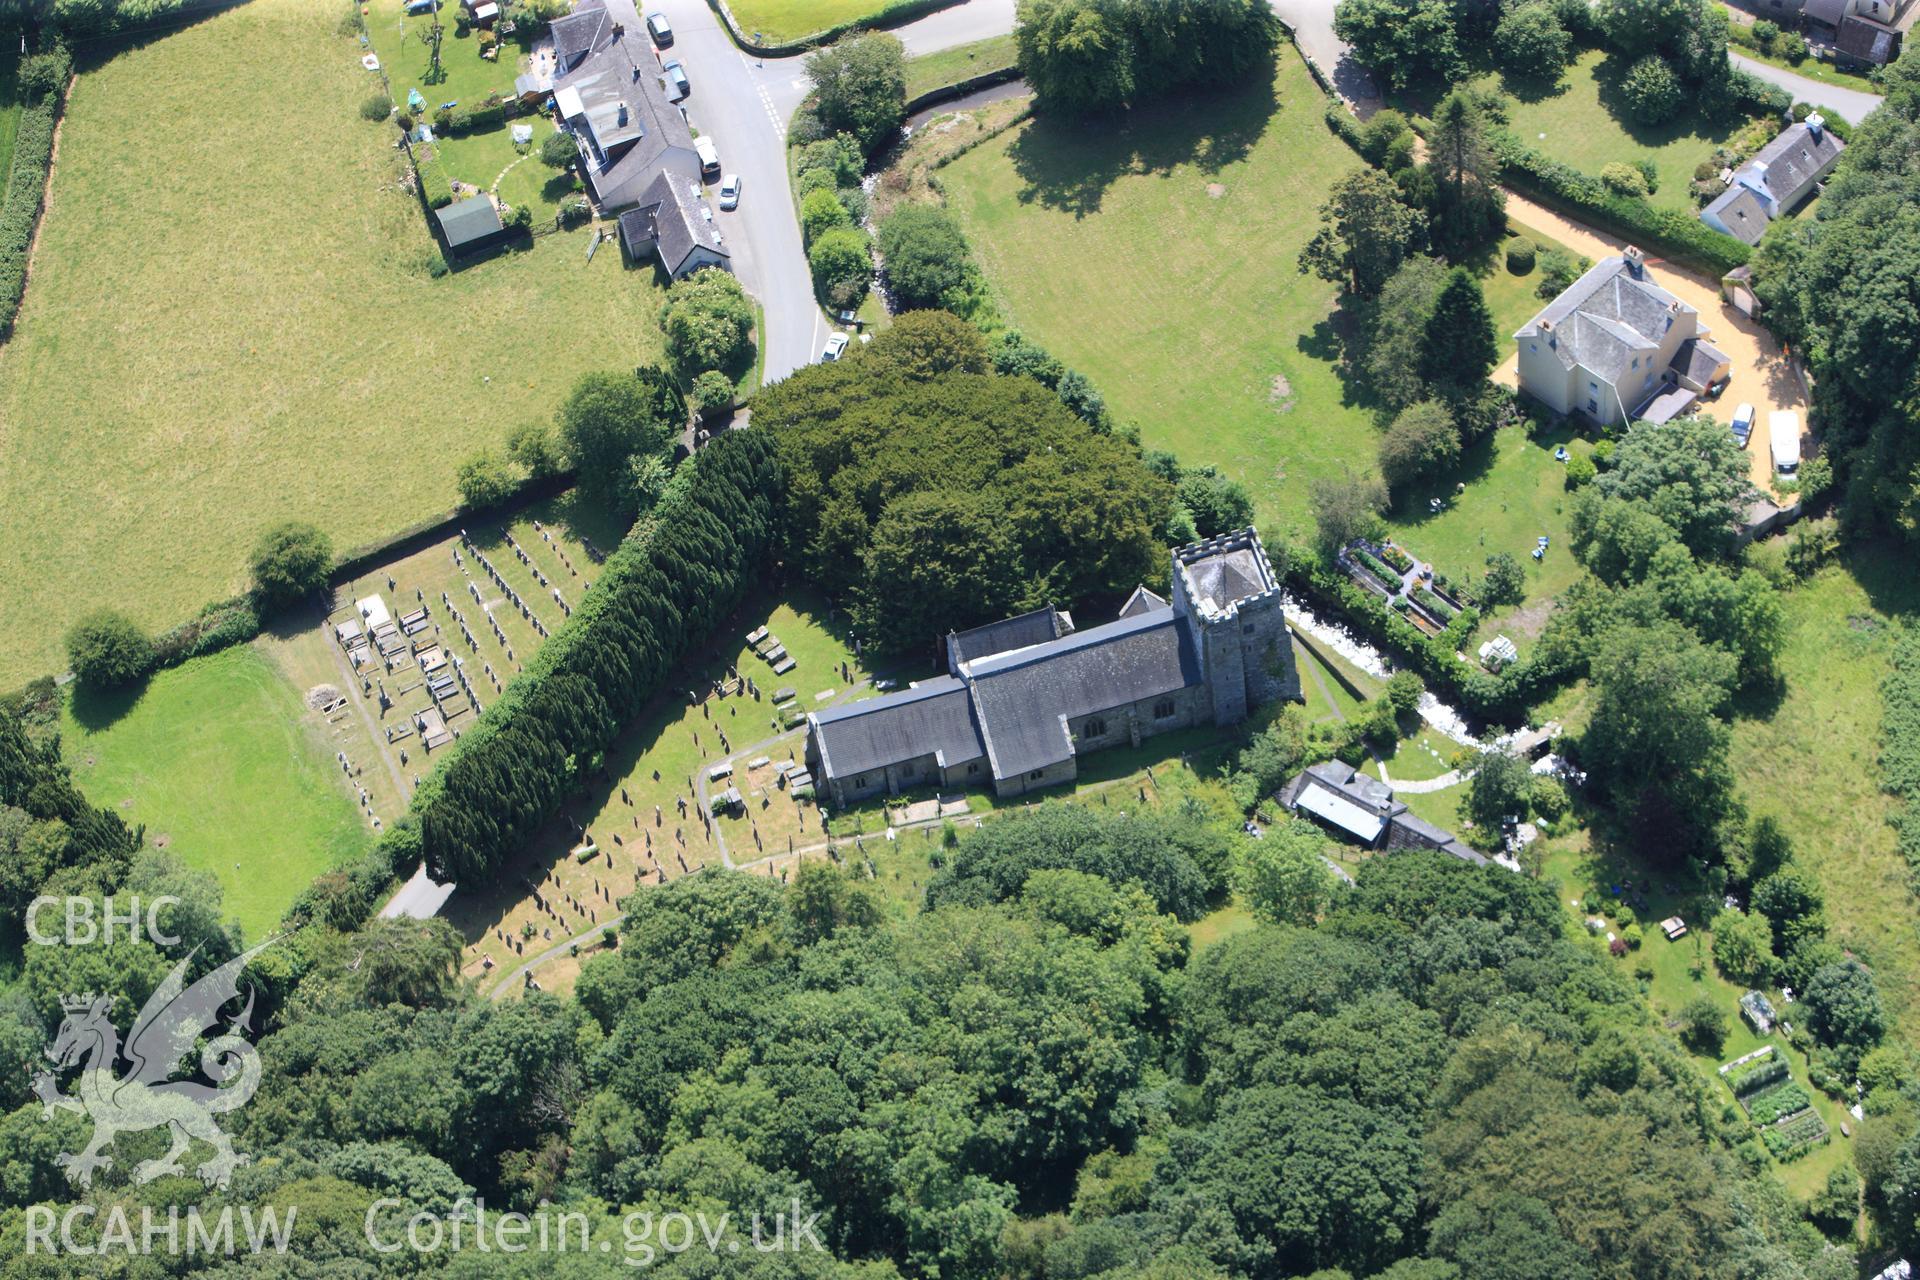 RCAHMW colour oblique photograph of St Brynach's Church, Nevern. Taken by Toby Driver and Oliver Davies on 28/06/2011.